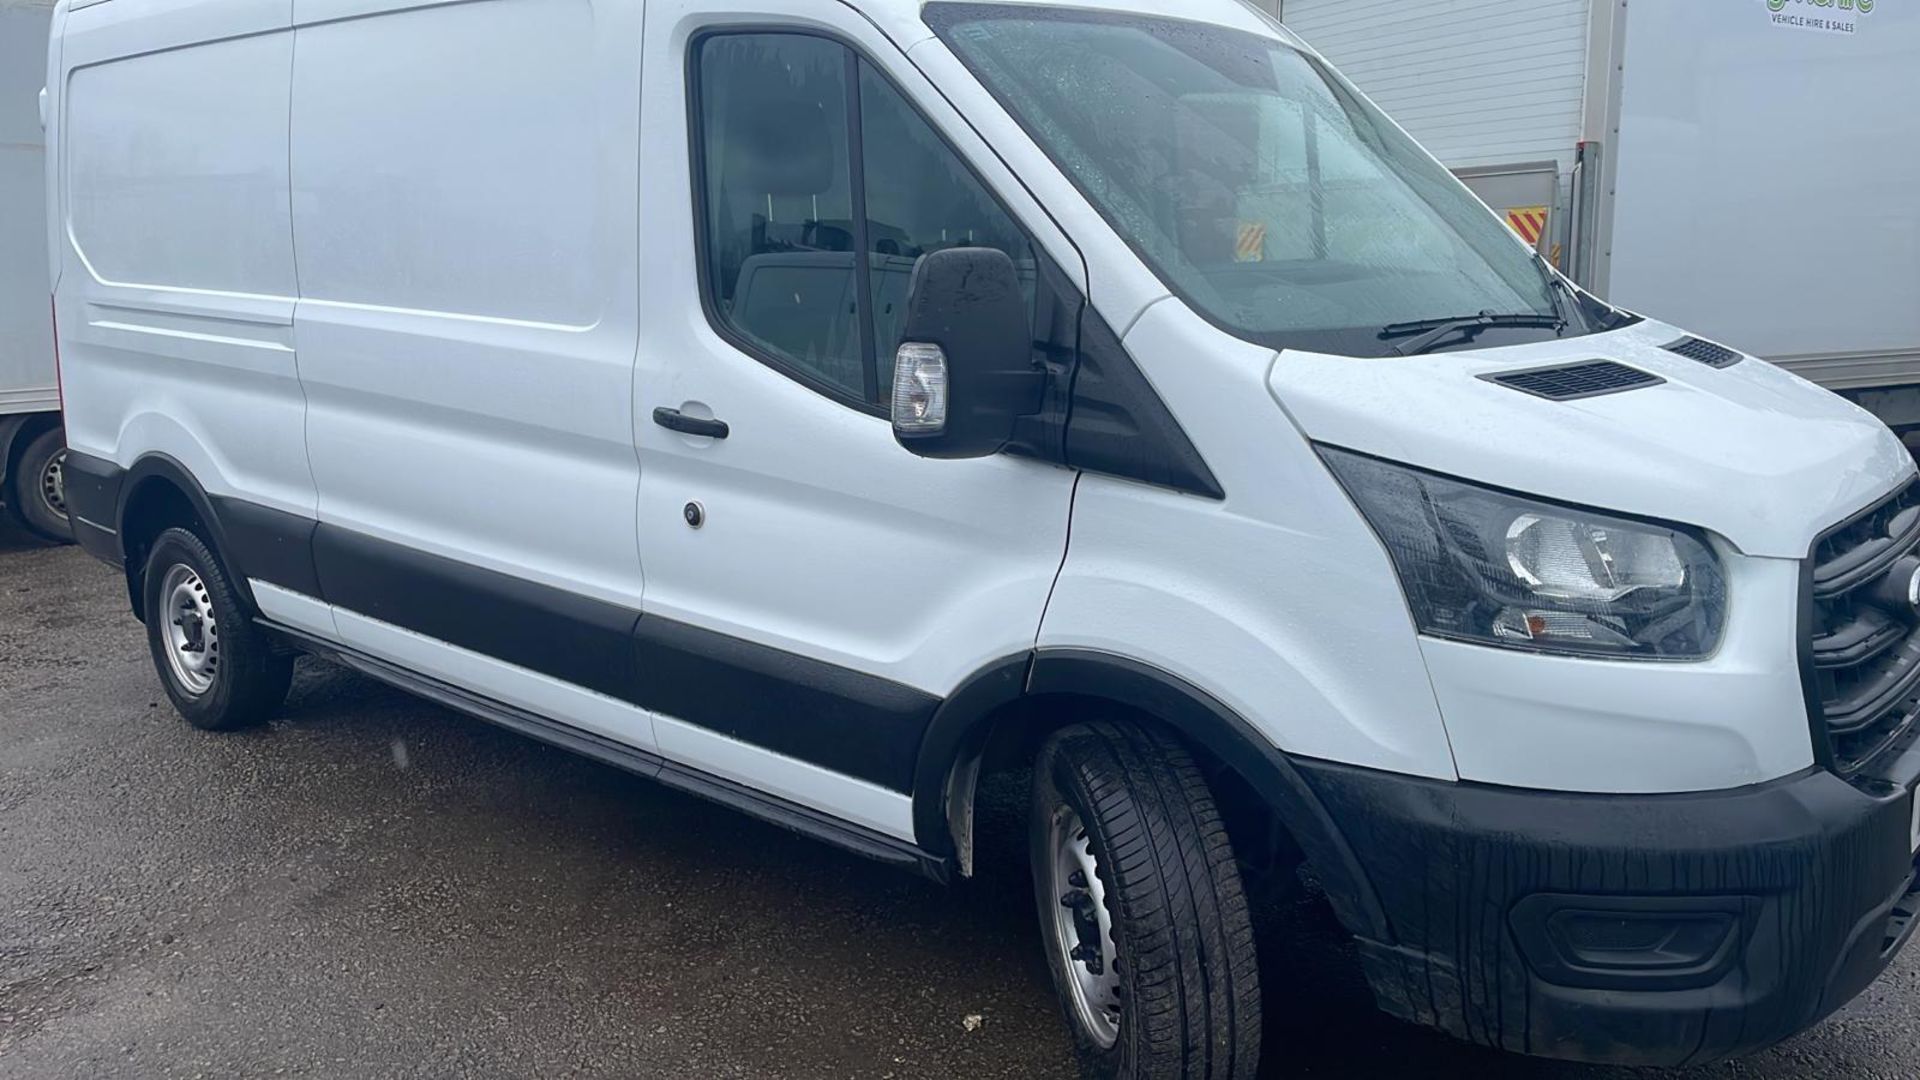 2022 22 PLATE FORD TRANSIT 350 LEADER ECO BLUE PANEL VAN - 24,186 WARRANTED MILES - FWD. - Image 2 of 9